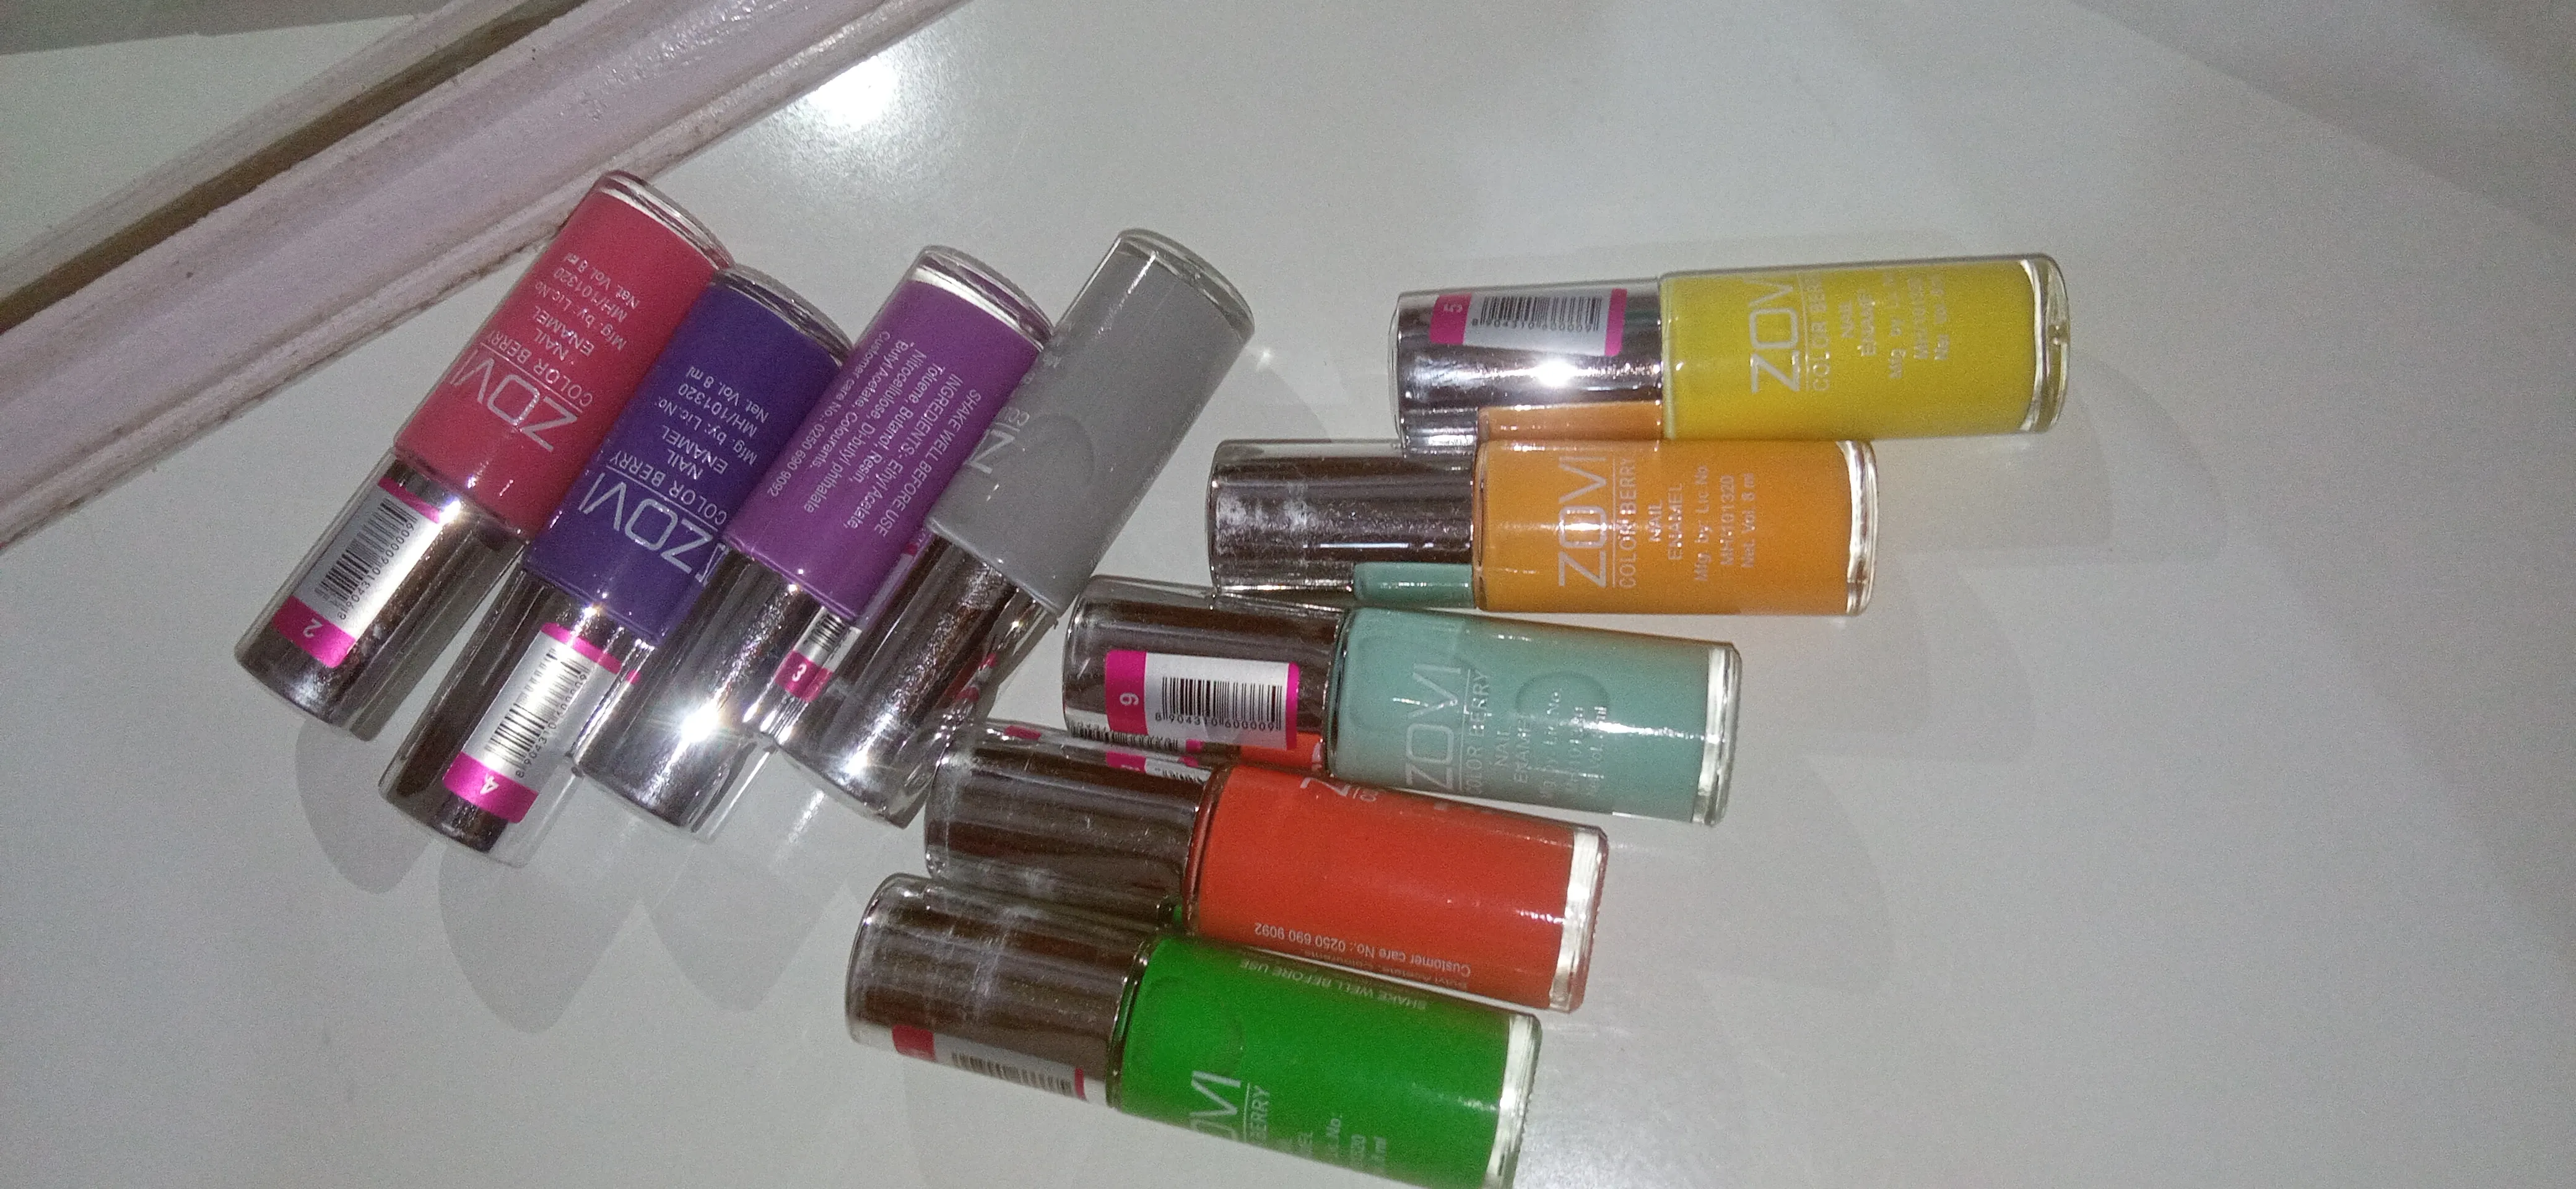 ZOVI. Branded Ice mate nail paints